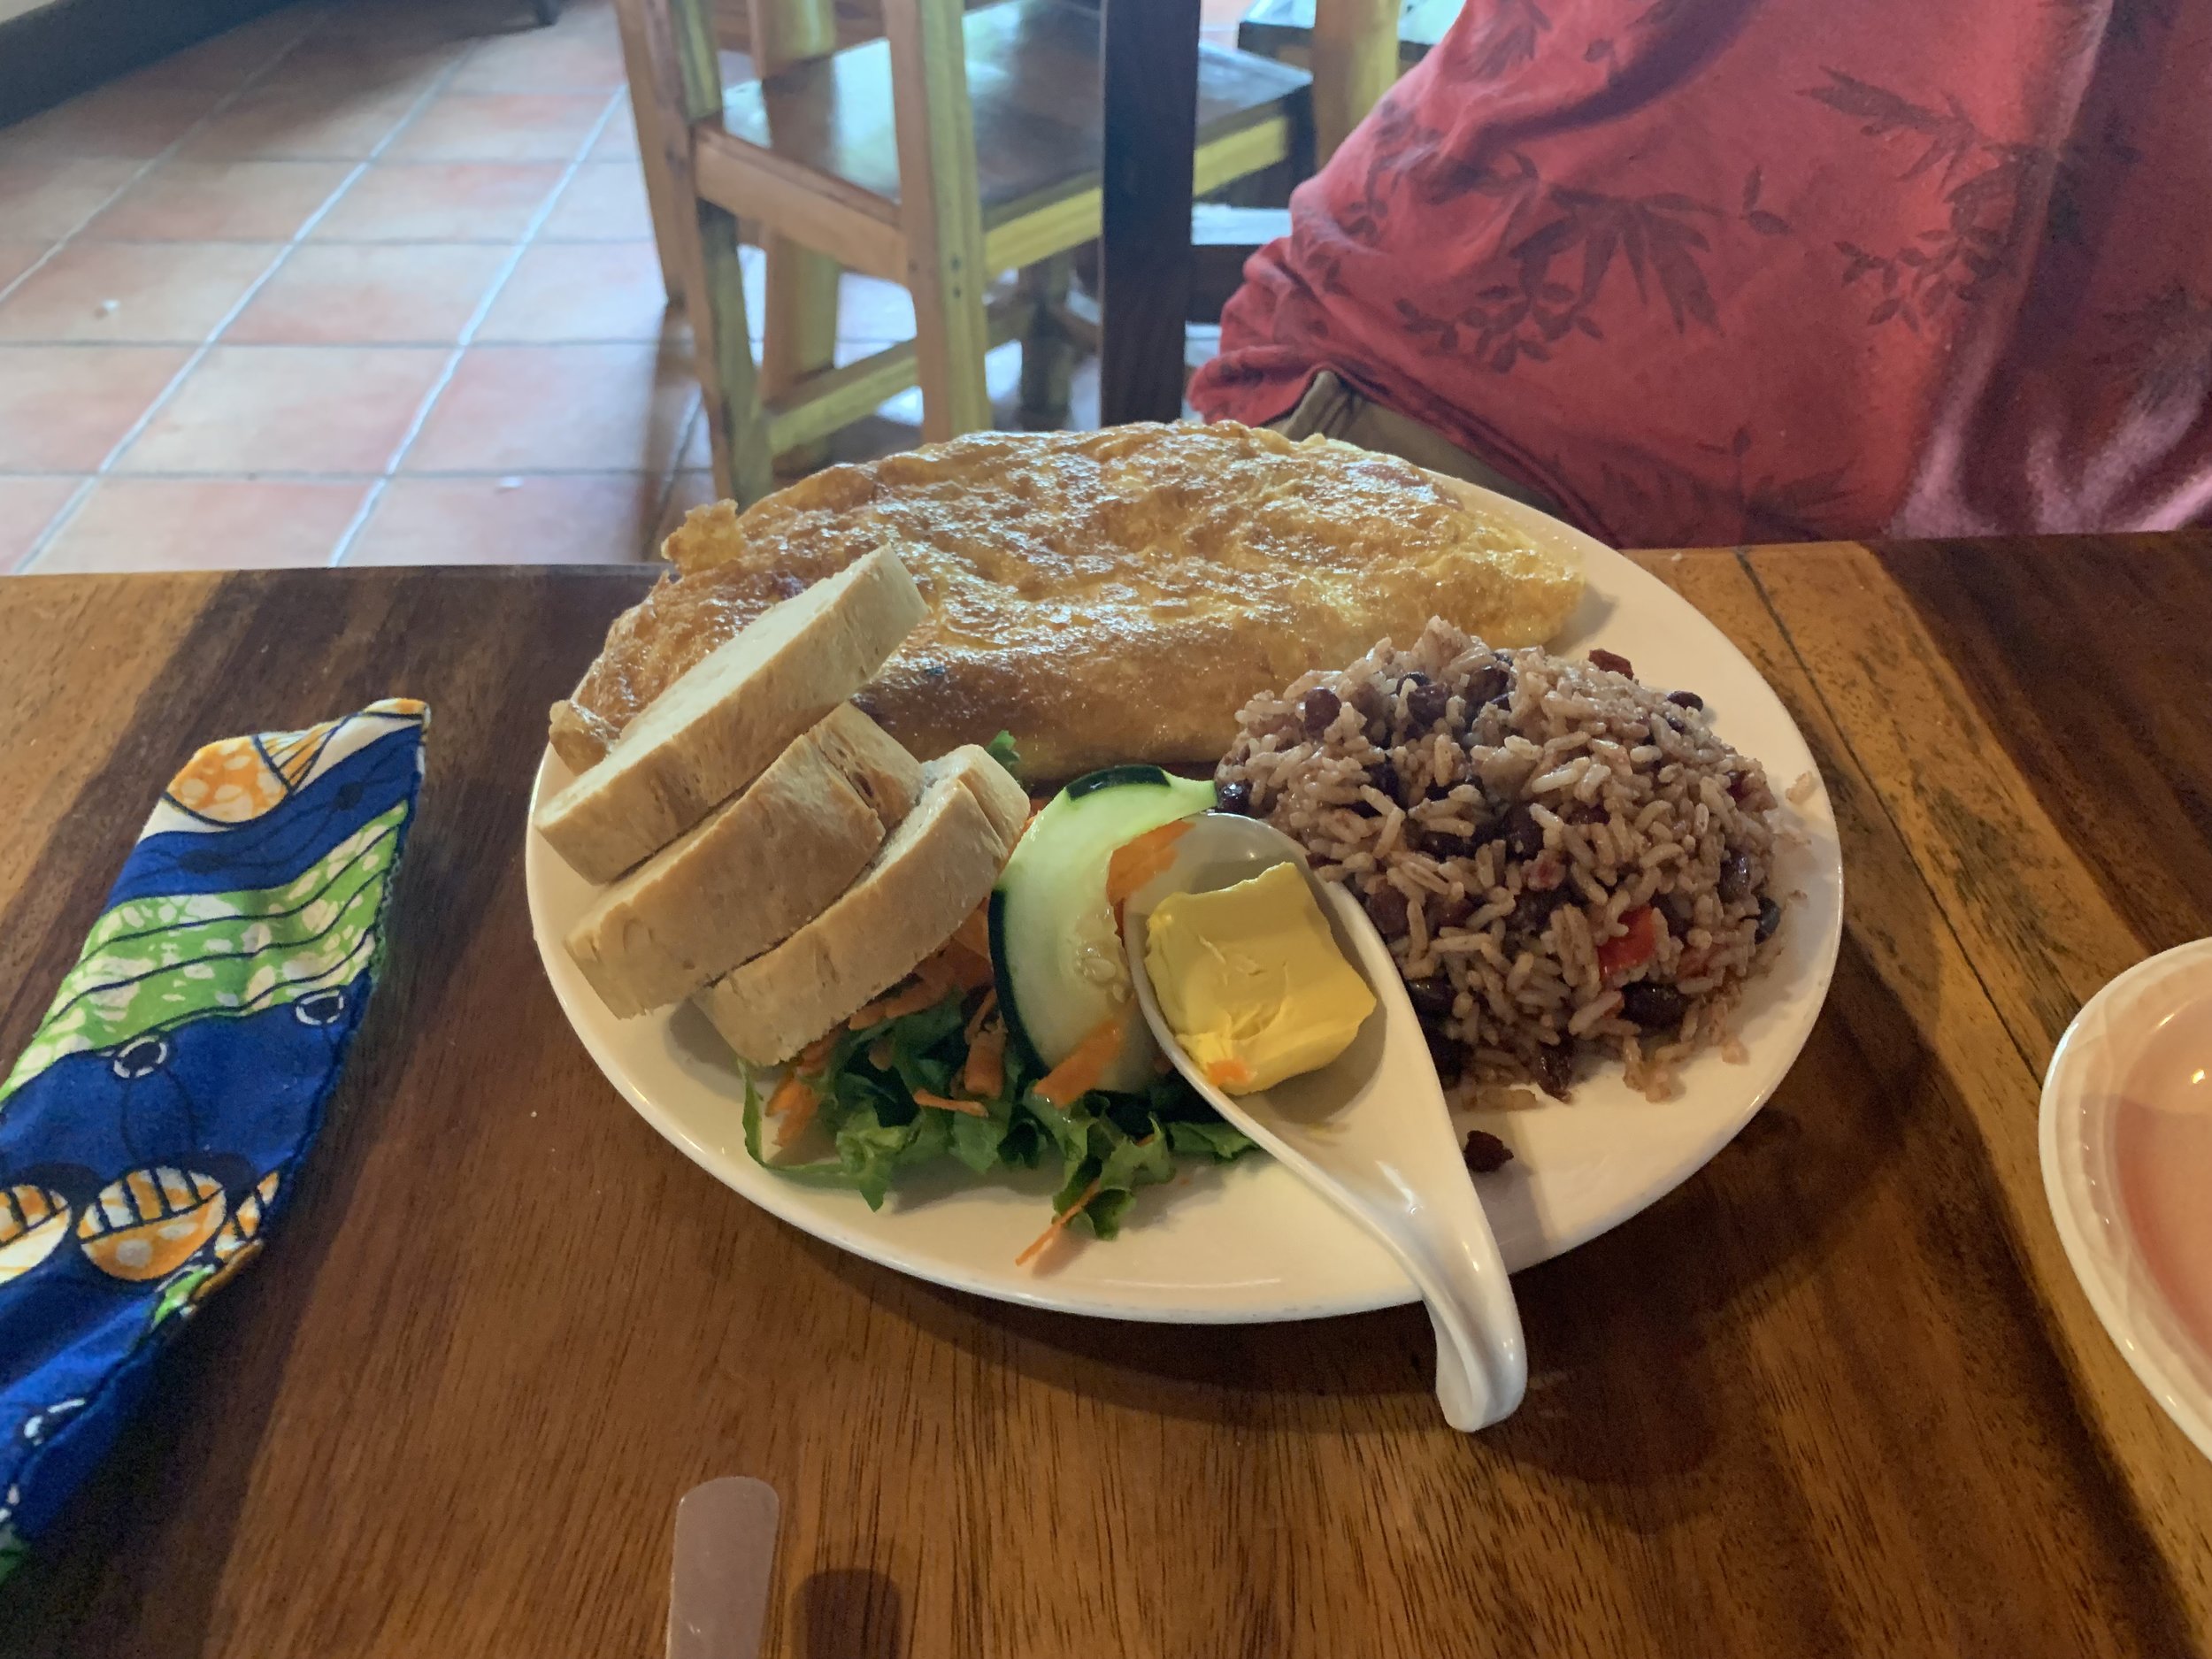  Gallo pinto alongside an omelette, salad and bread. 